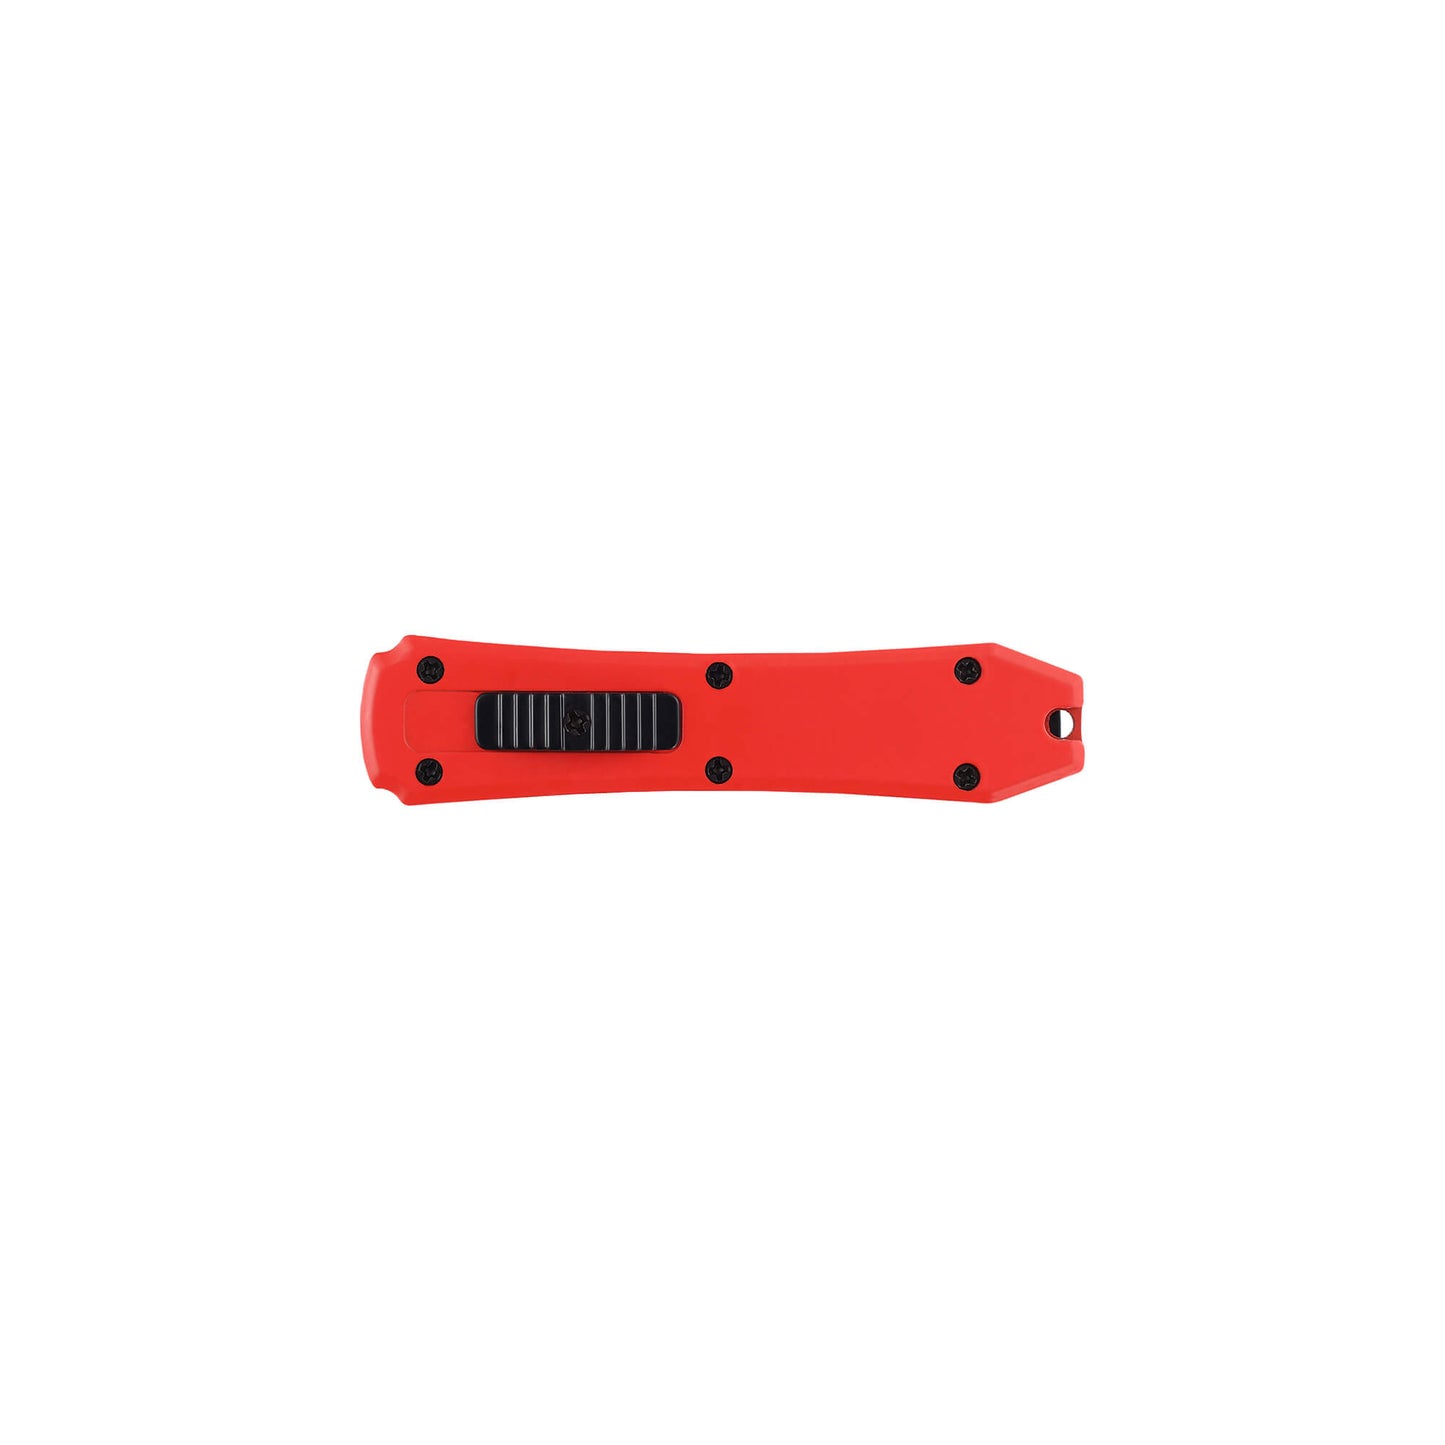 Red Hunting, fishing, EDC Mini automatic OTF knife Xkarve with spear point blade, Zinc alloy handle and lanyard hole.